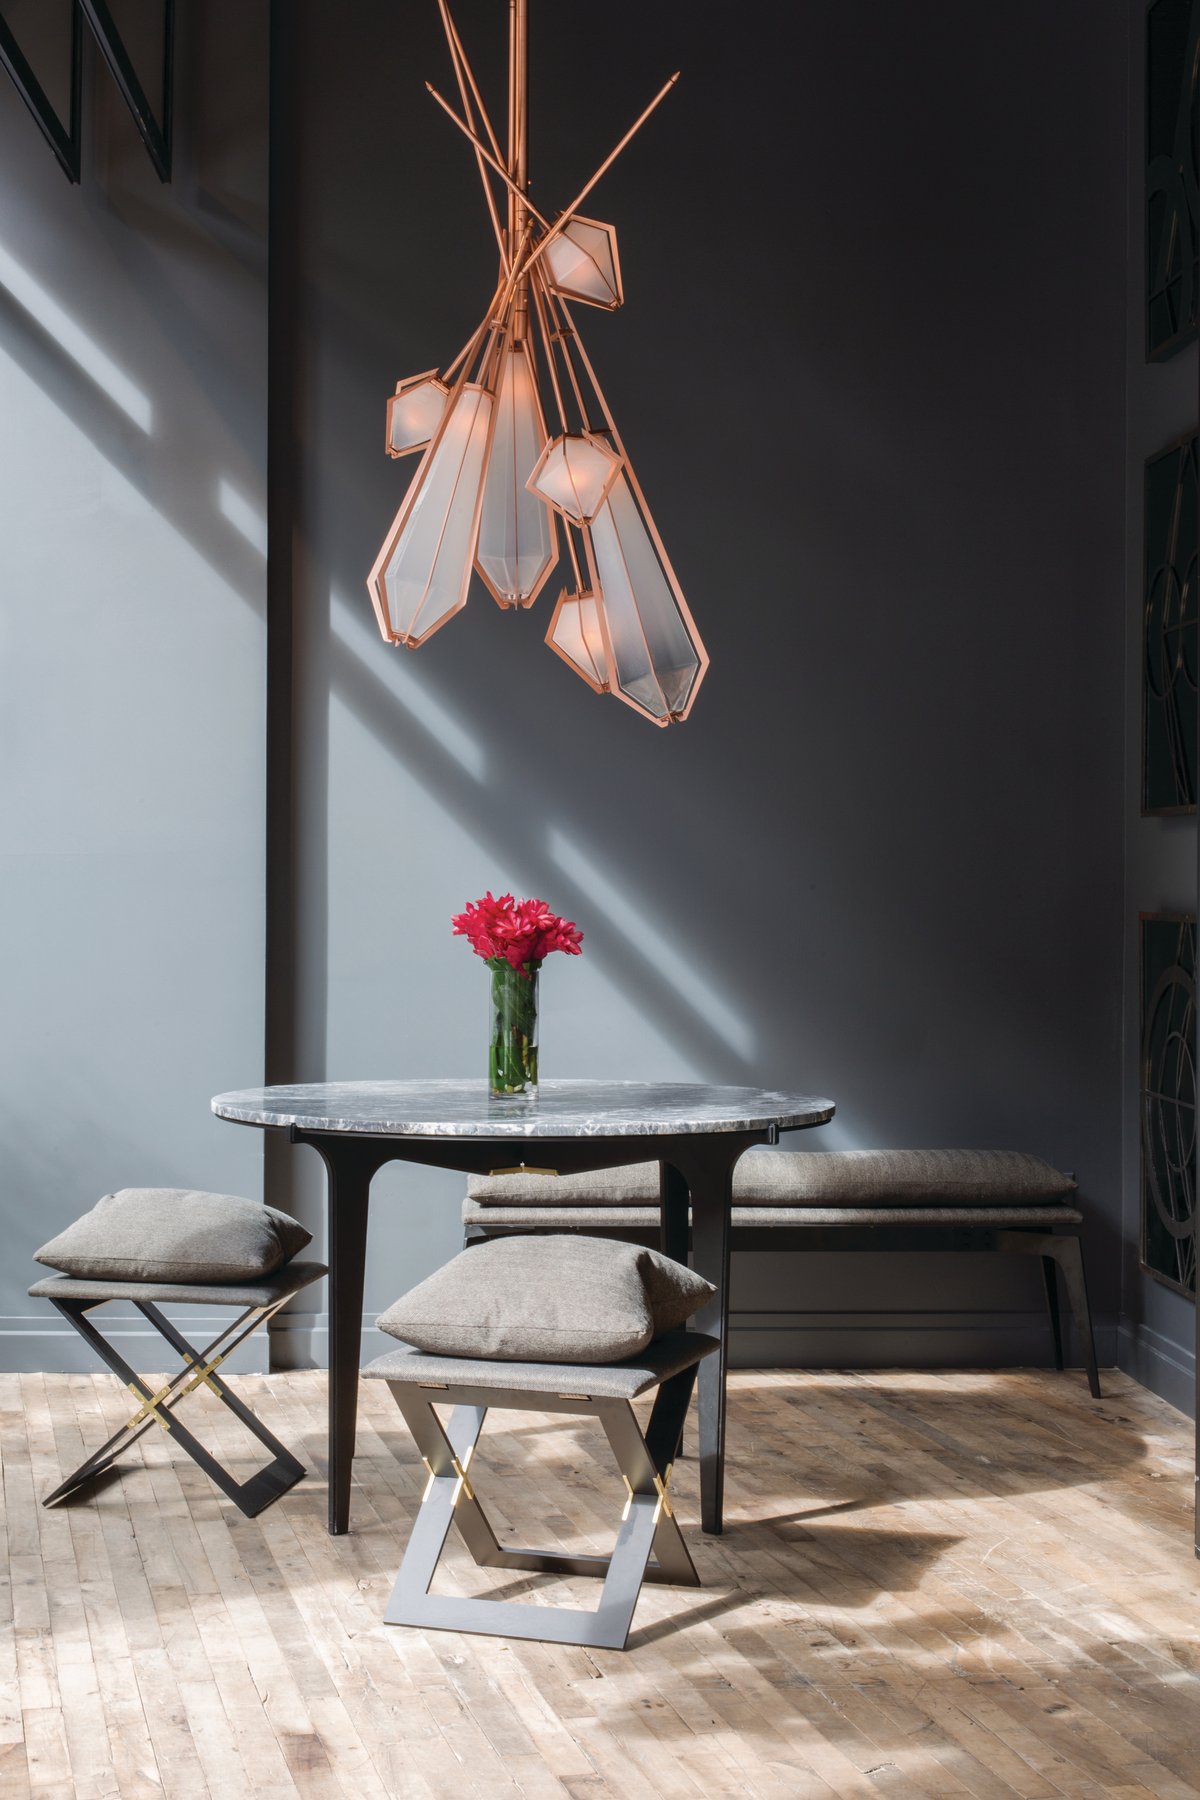 Quartz-shaped pendant over marble table with flower centerpiece